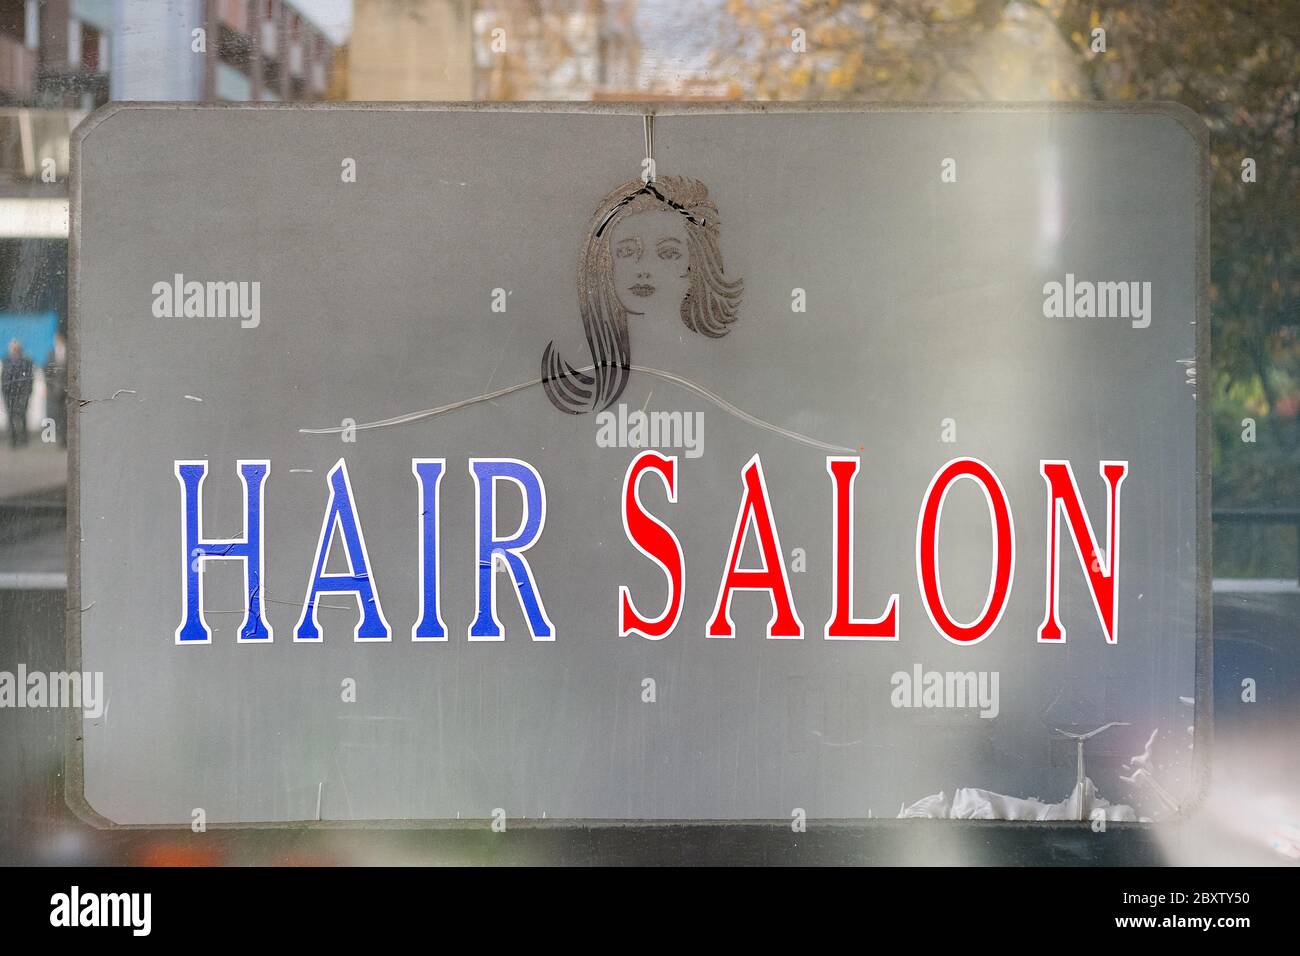 London, UK - November 16, 2019 - Sign of a hair salon located at Barbican estate complex Stock Photo